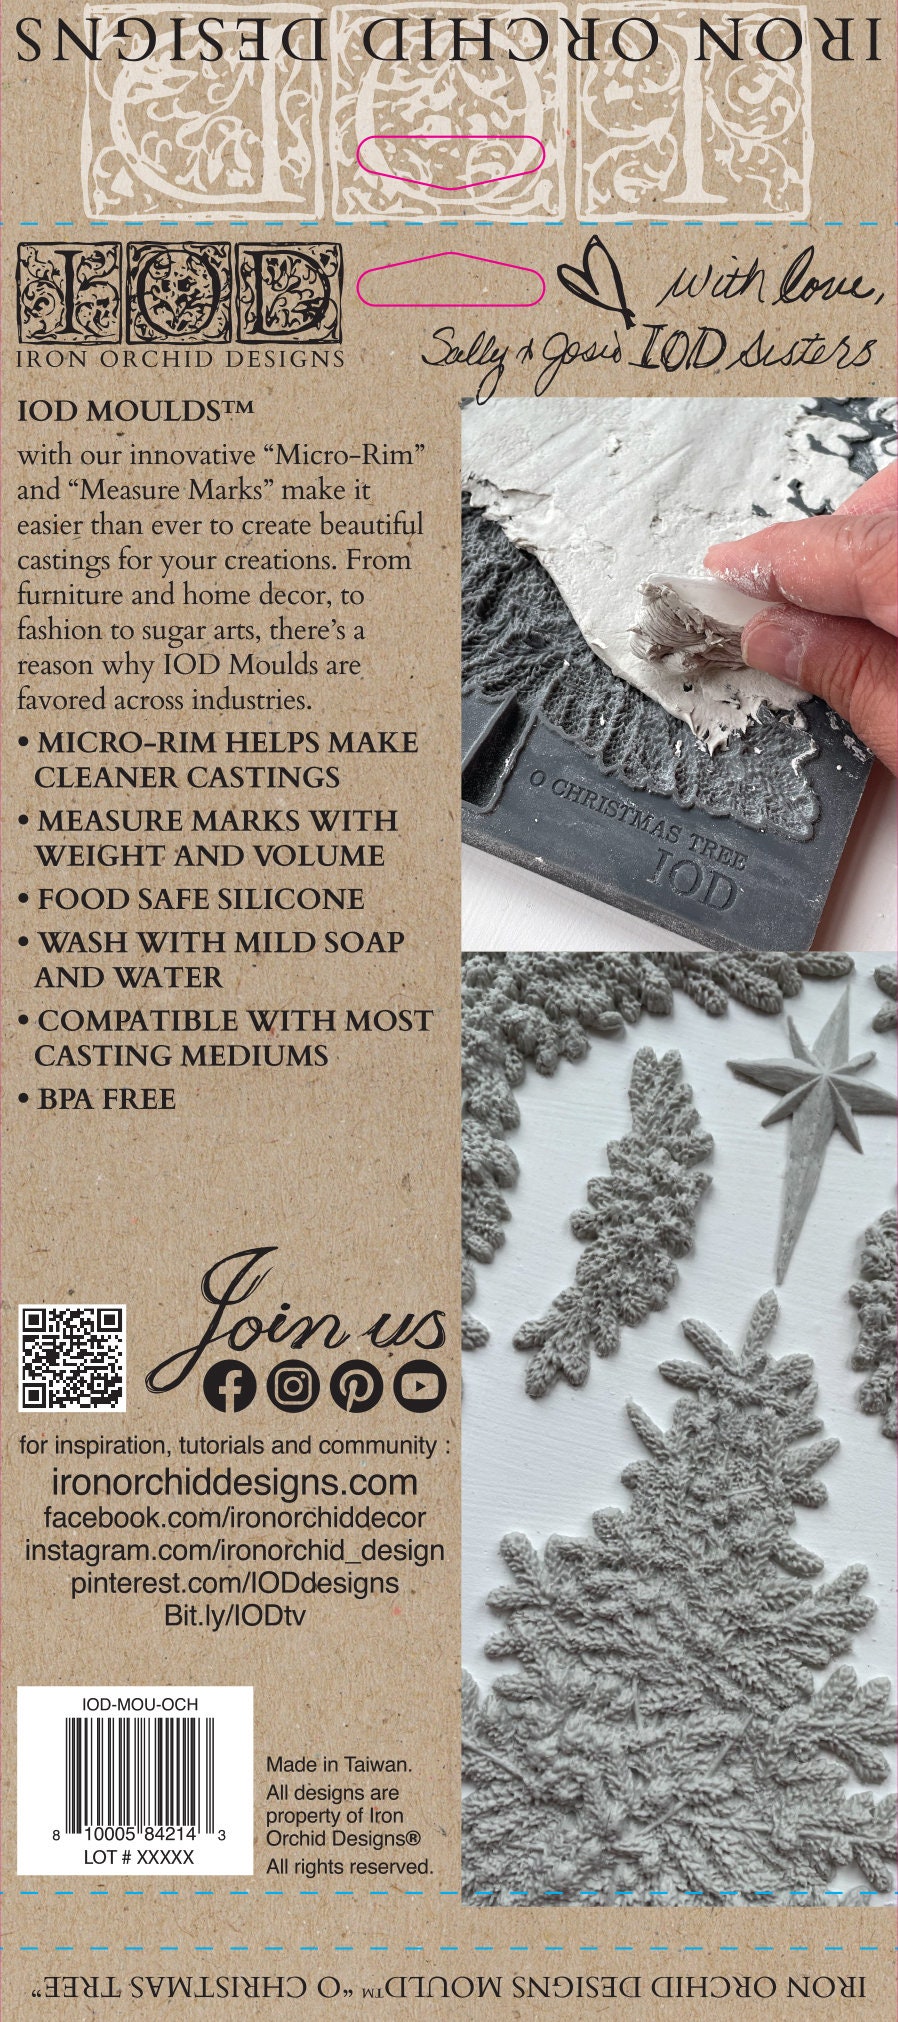 O Christmas Tree IOD décor mould 6 x 10 - by Iron Orchid Designs - Limited Christmas Release